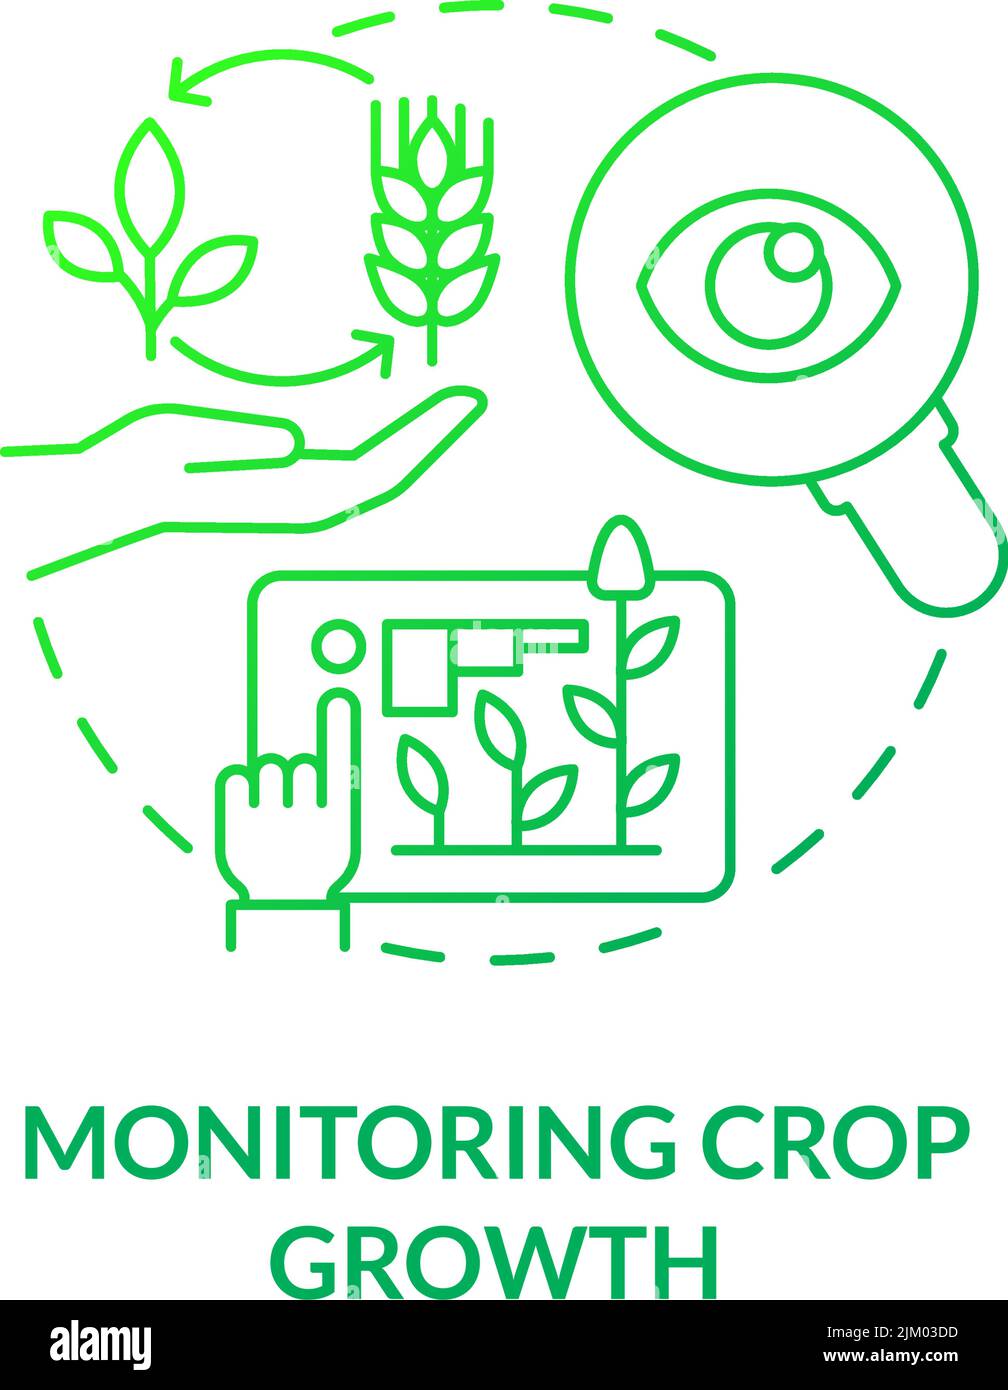 Monitoring crop growth green gradient concept icon Stock Vector